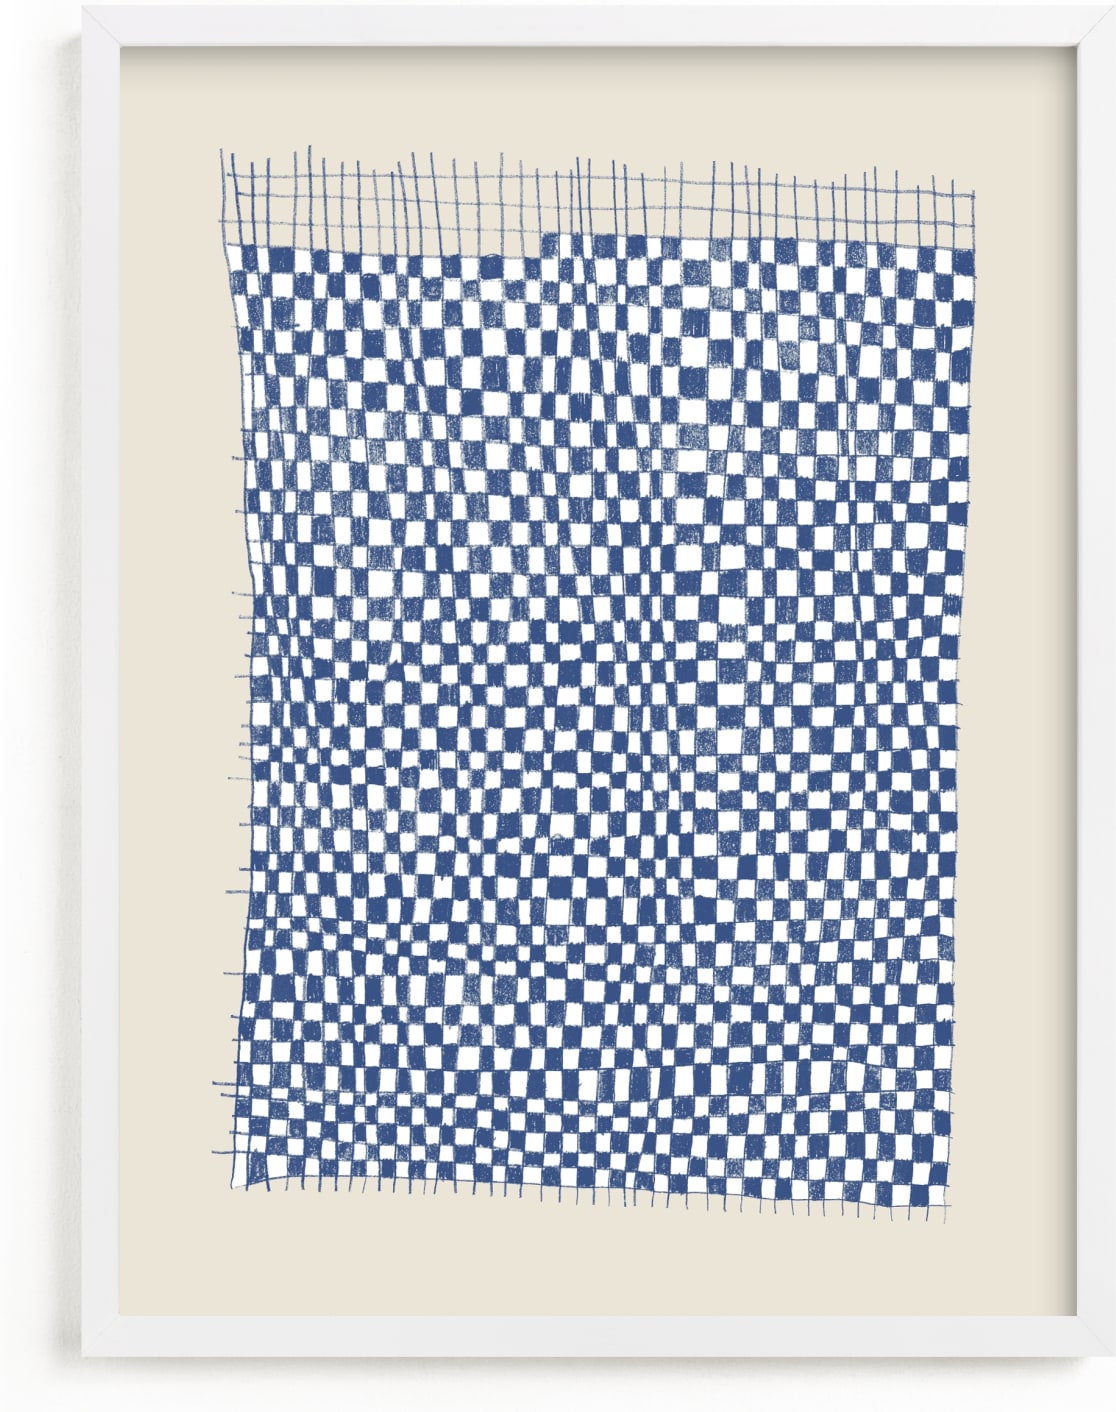 This is a blue art by Tiny Type Studios called Checkerboard Weaving.